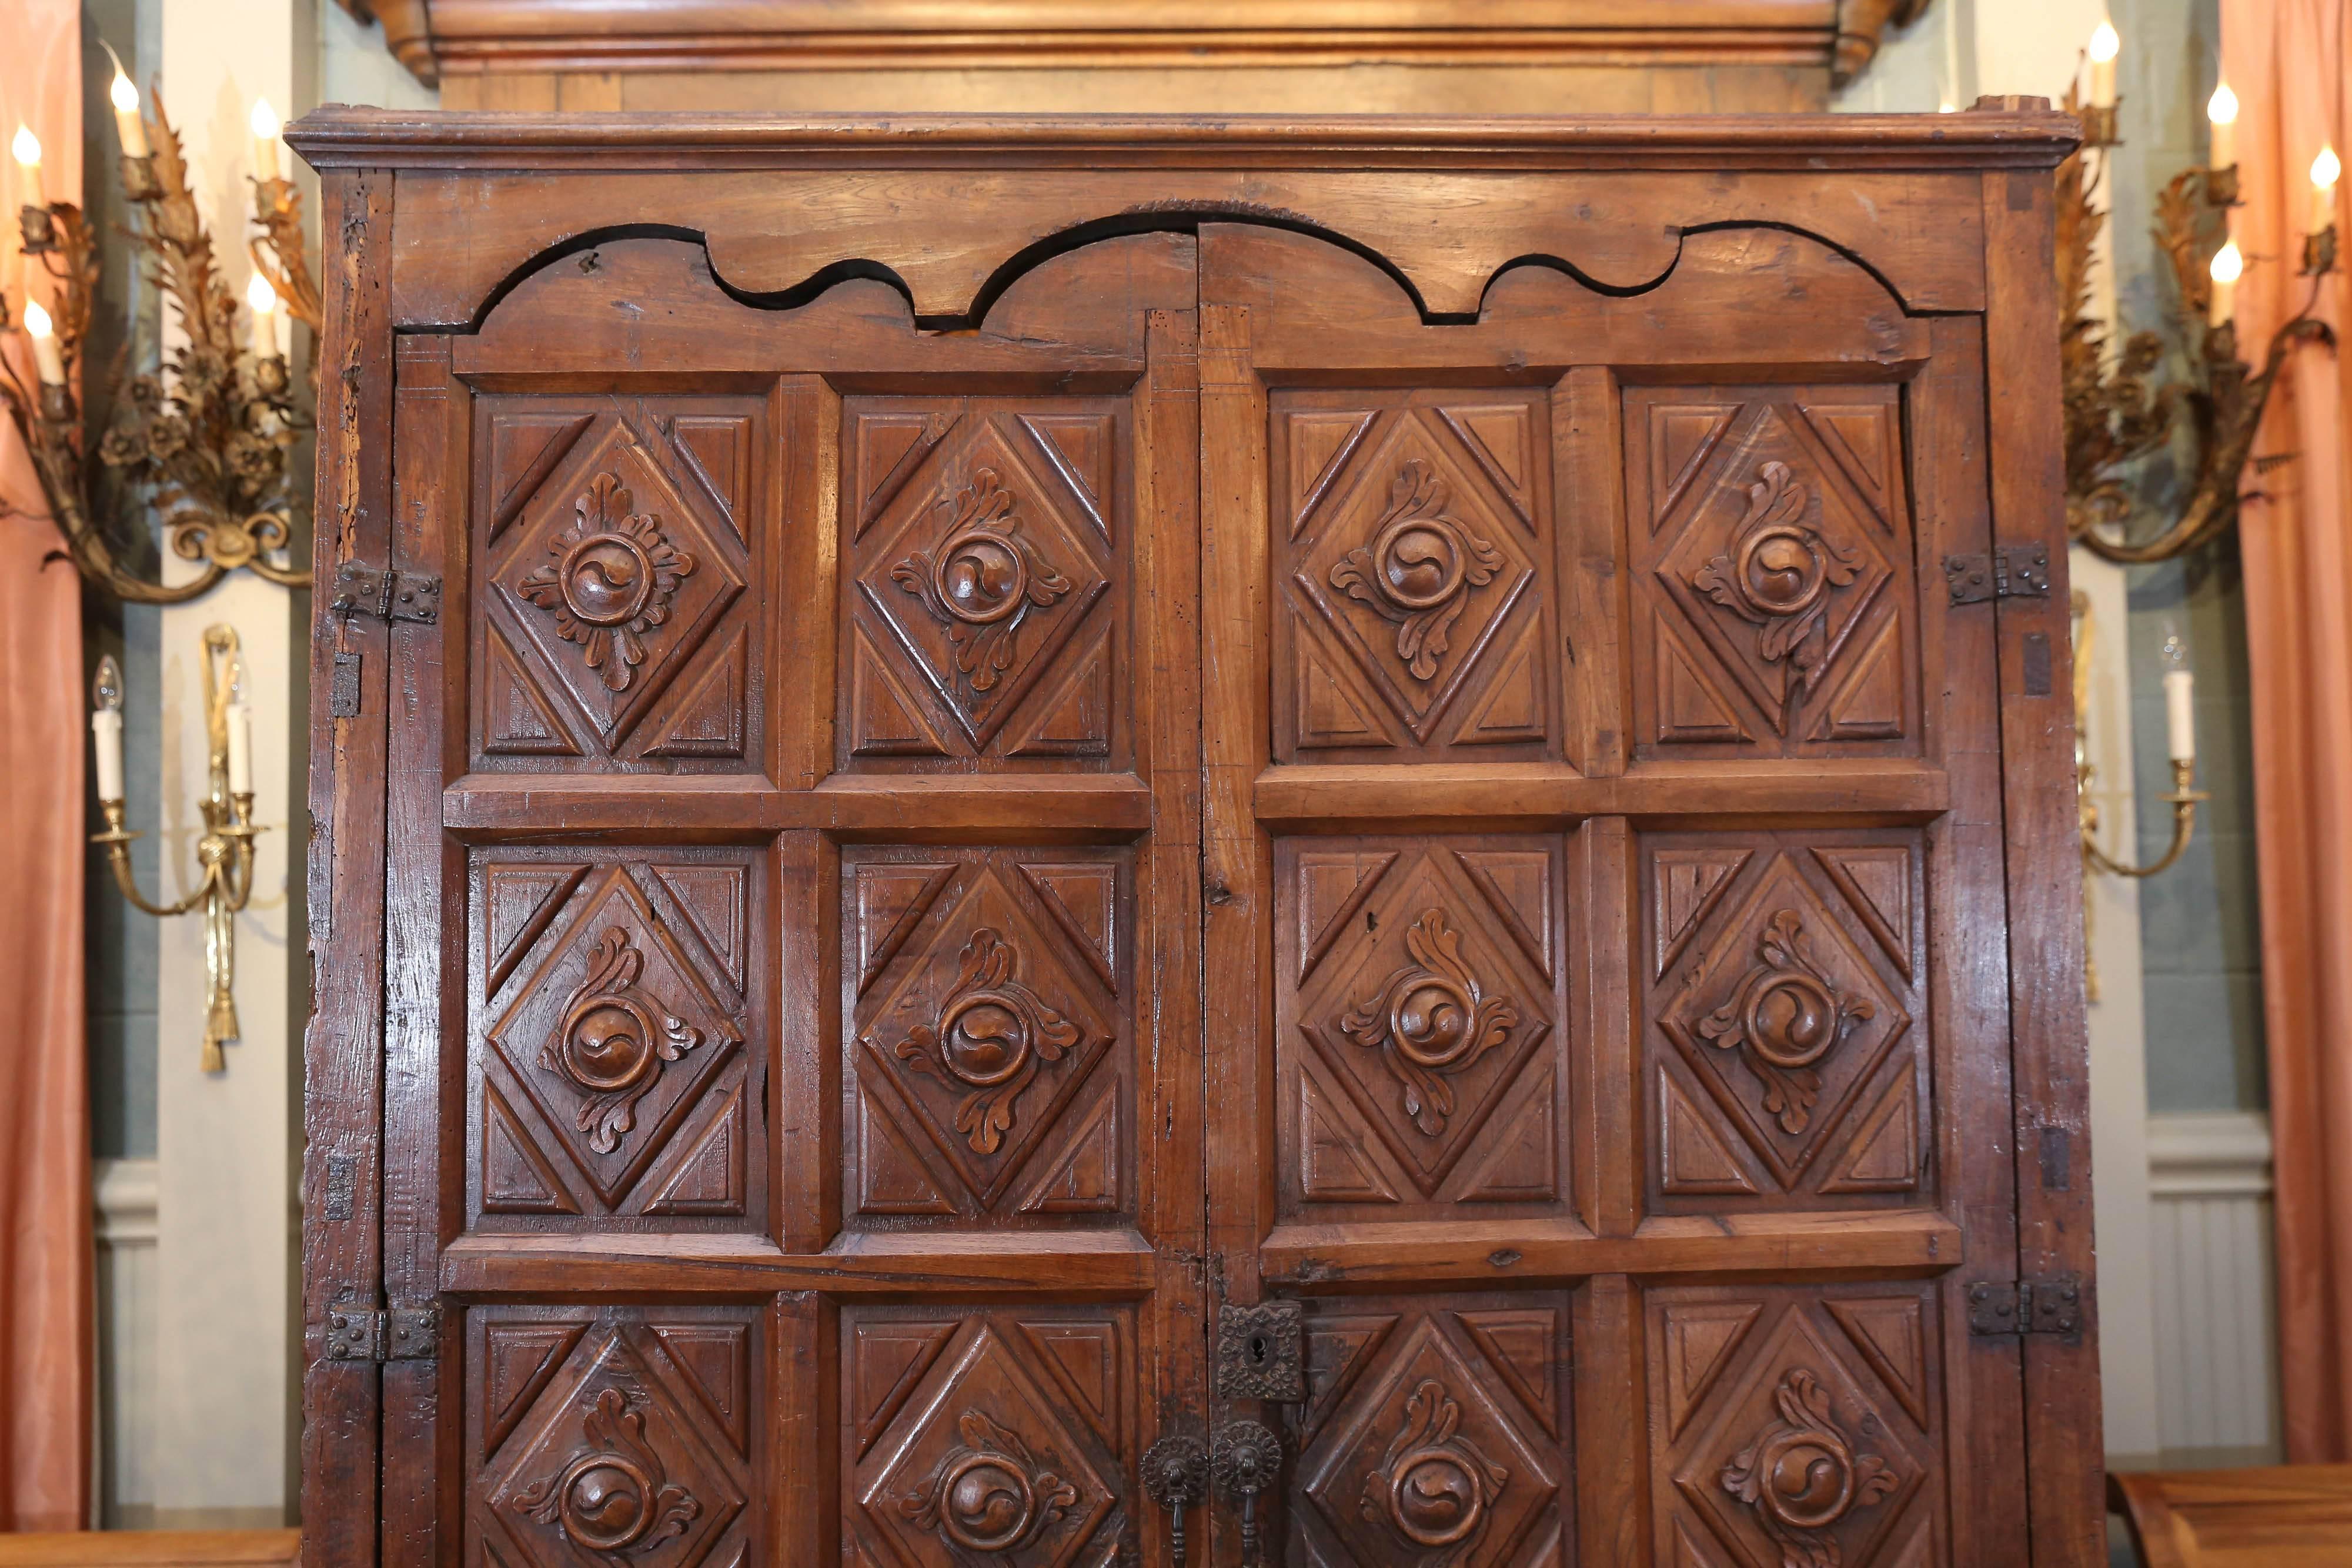 Early 17th century Colonial English oak armoire sits upon a carved stand.
The doors feature a 16 diamond shaped beveled panels surrounded by triangles in each corner. Rosettes surrounded by four carved leaves.
Top of doors are scalloped in a